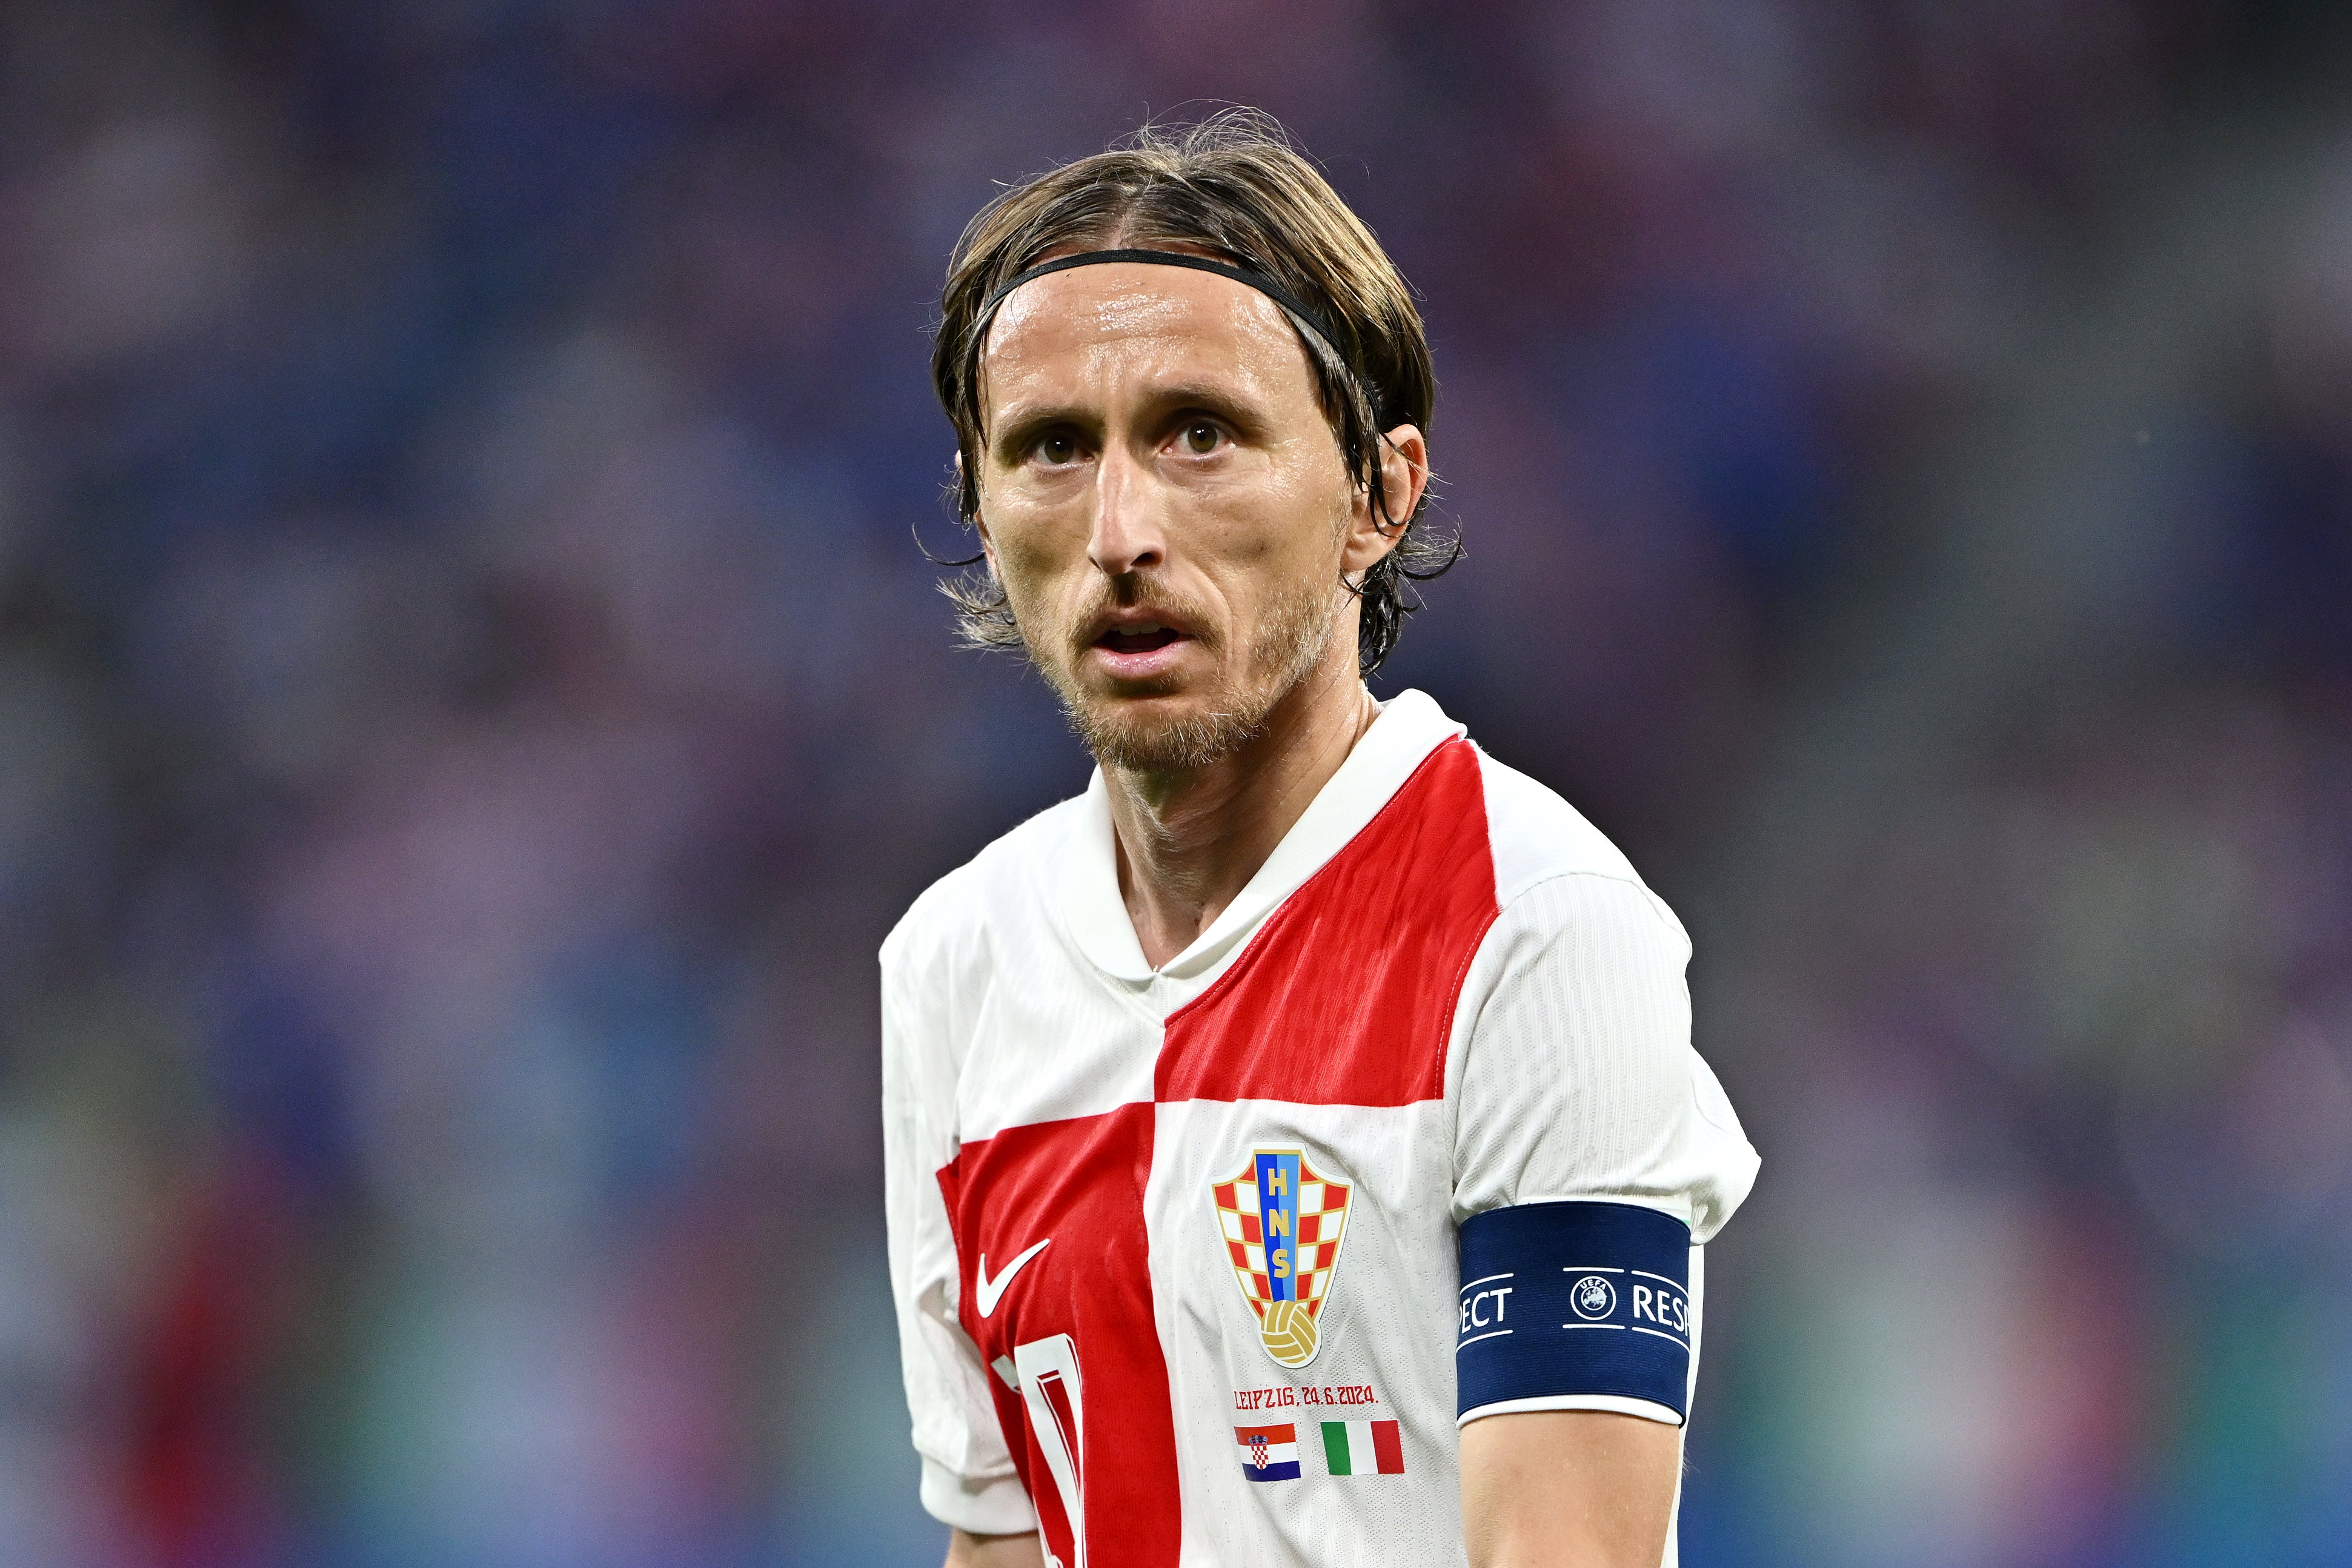 Luka Modric could have played in his final international competition